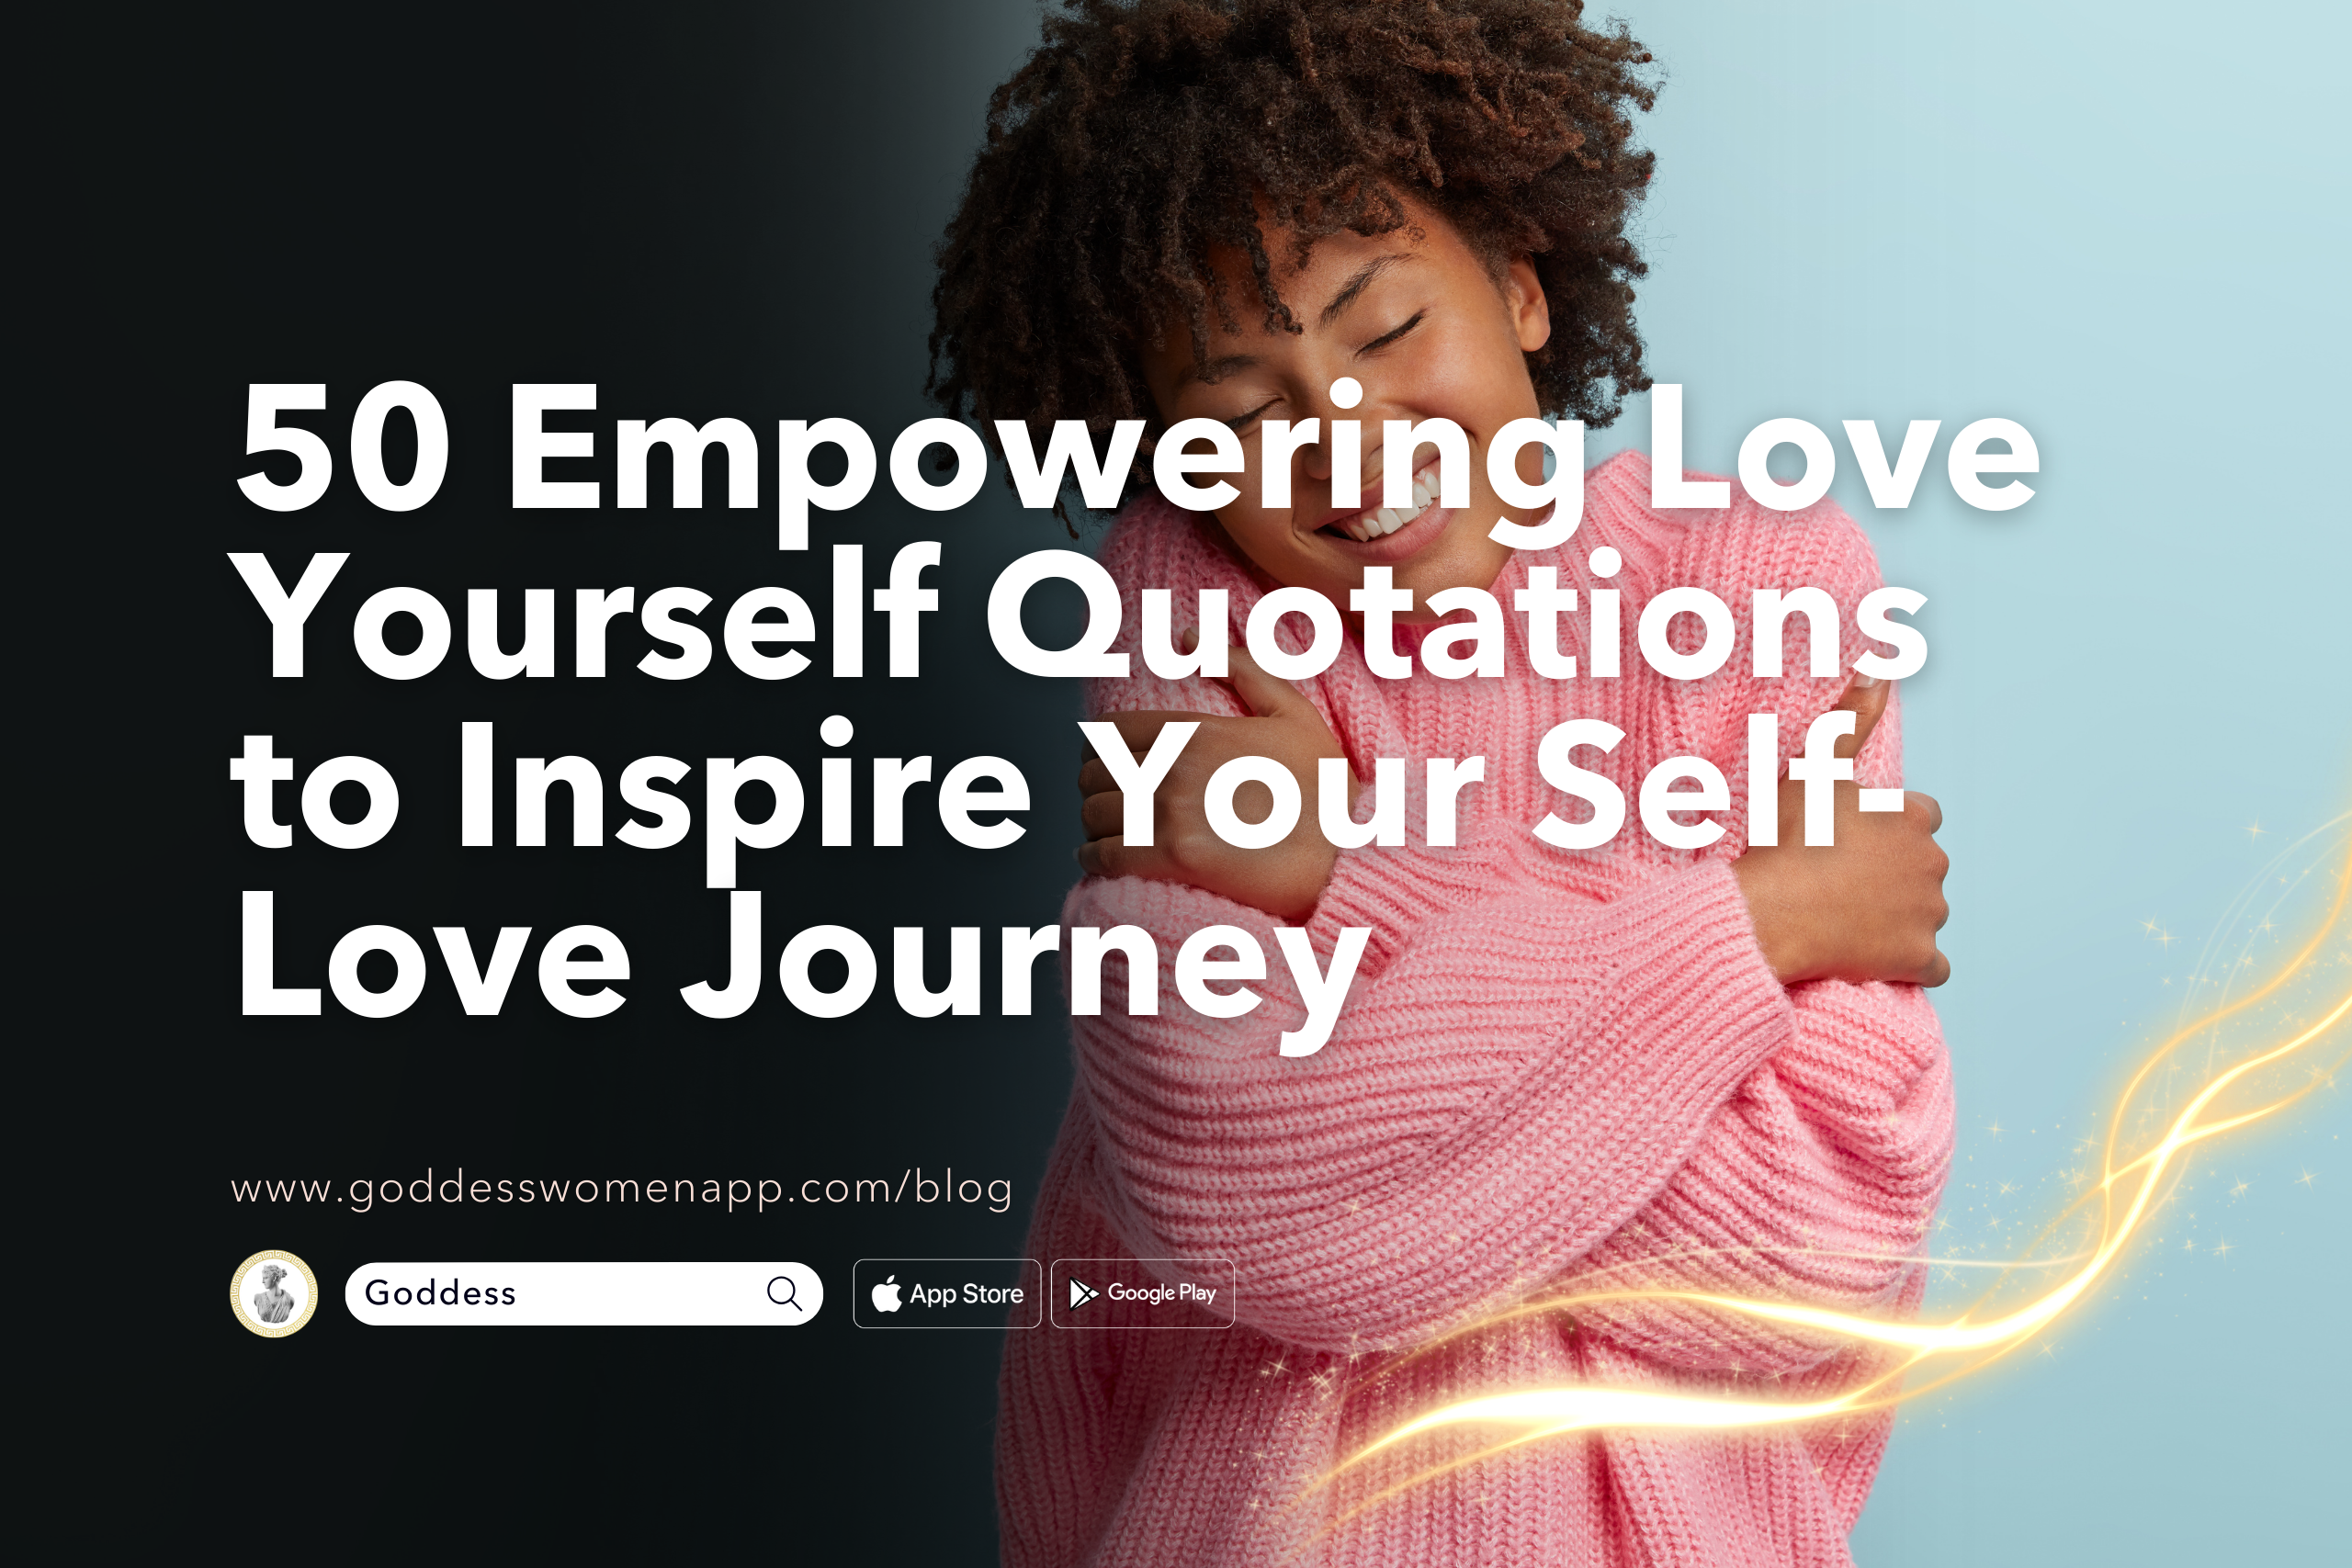 50 Empowering Love Yourself Quotations to Inspire Your Self-Love Journey